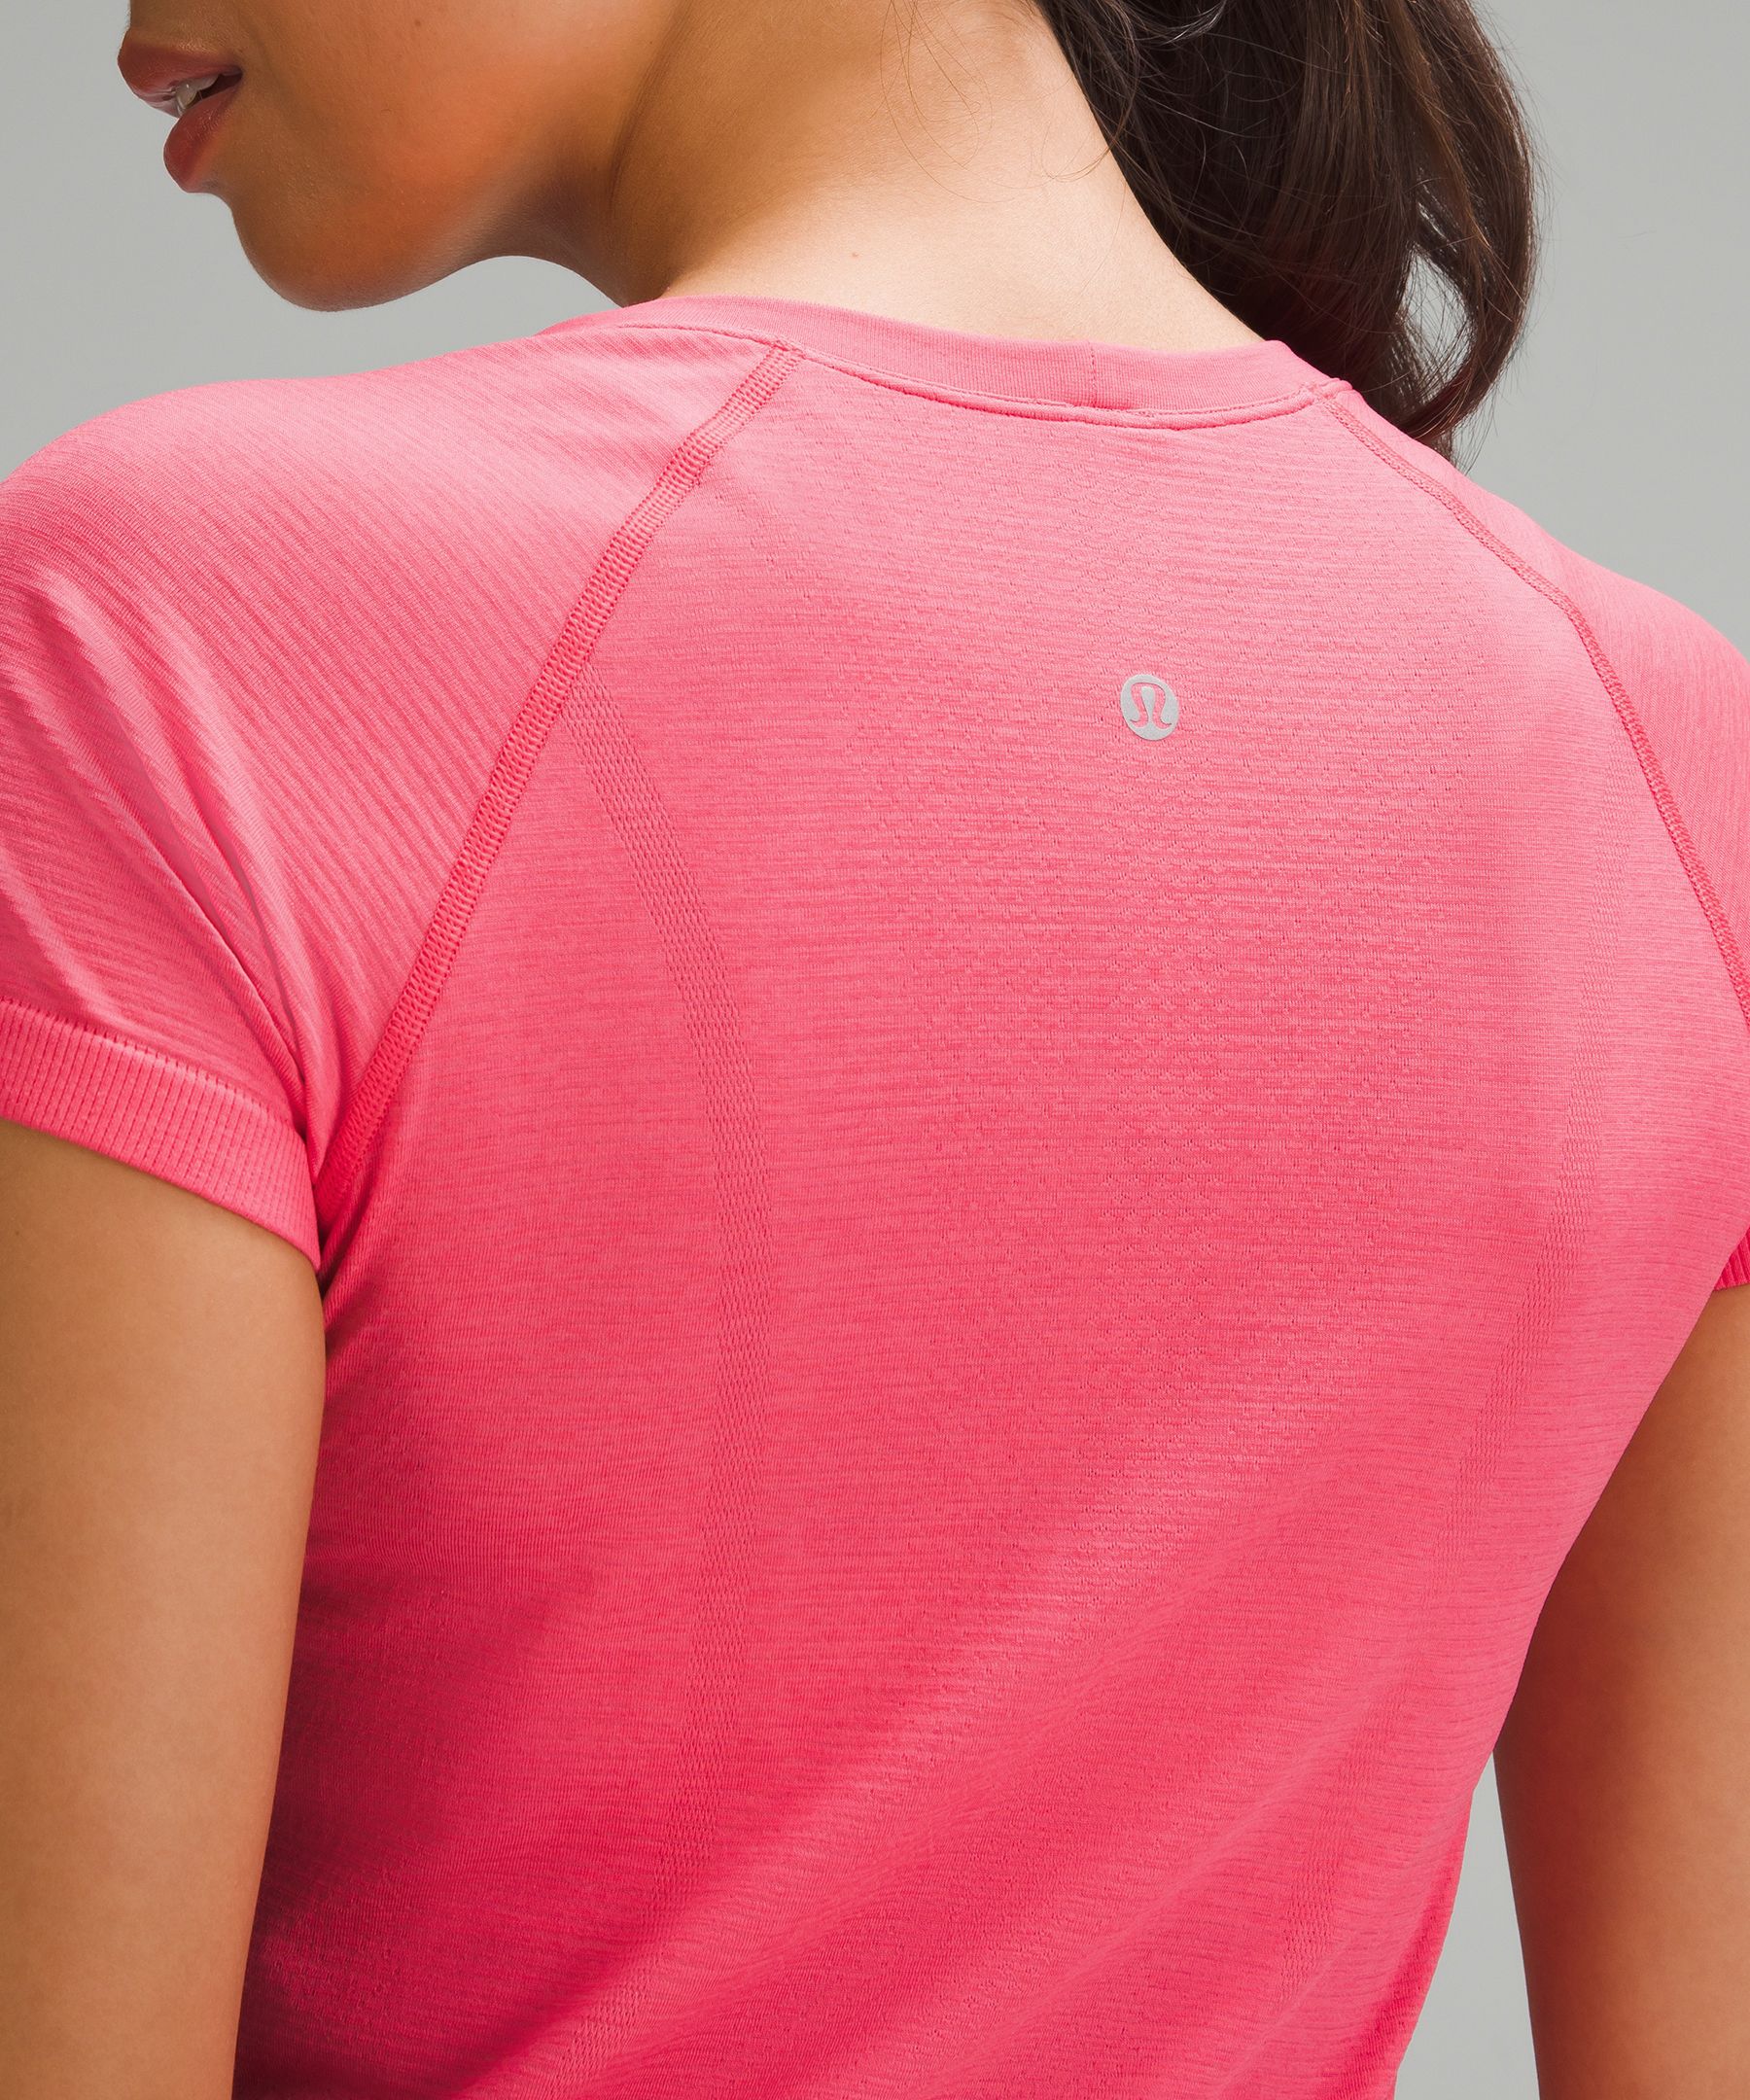 Lululemon Swiftly Tech Short Sleeve Top in Peach — UFO No More